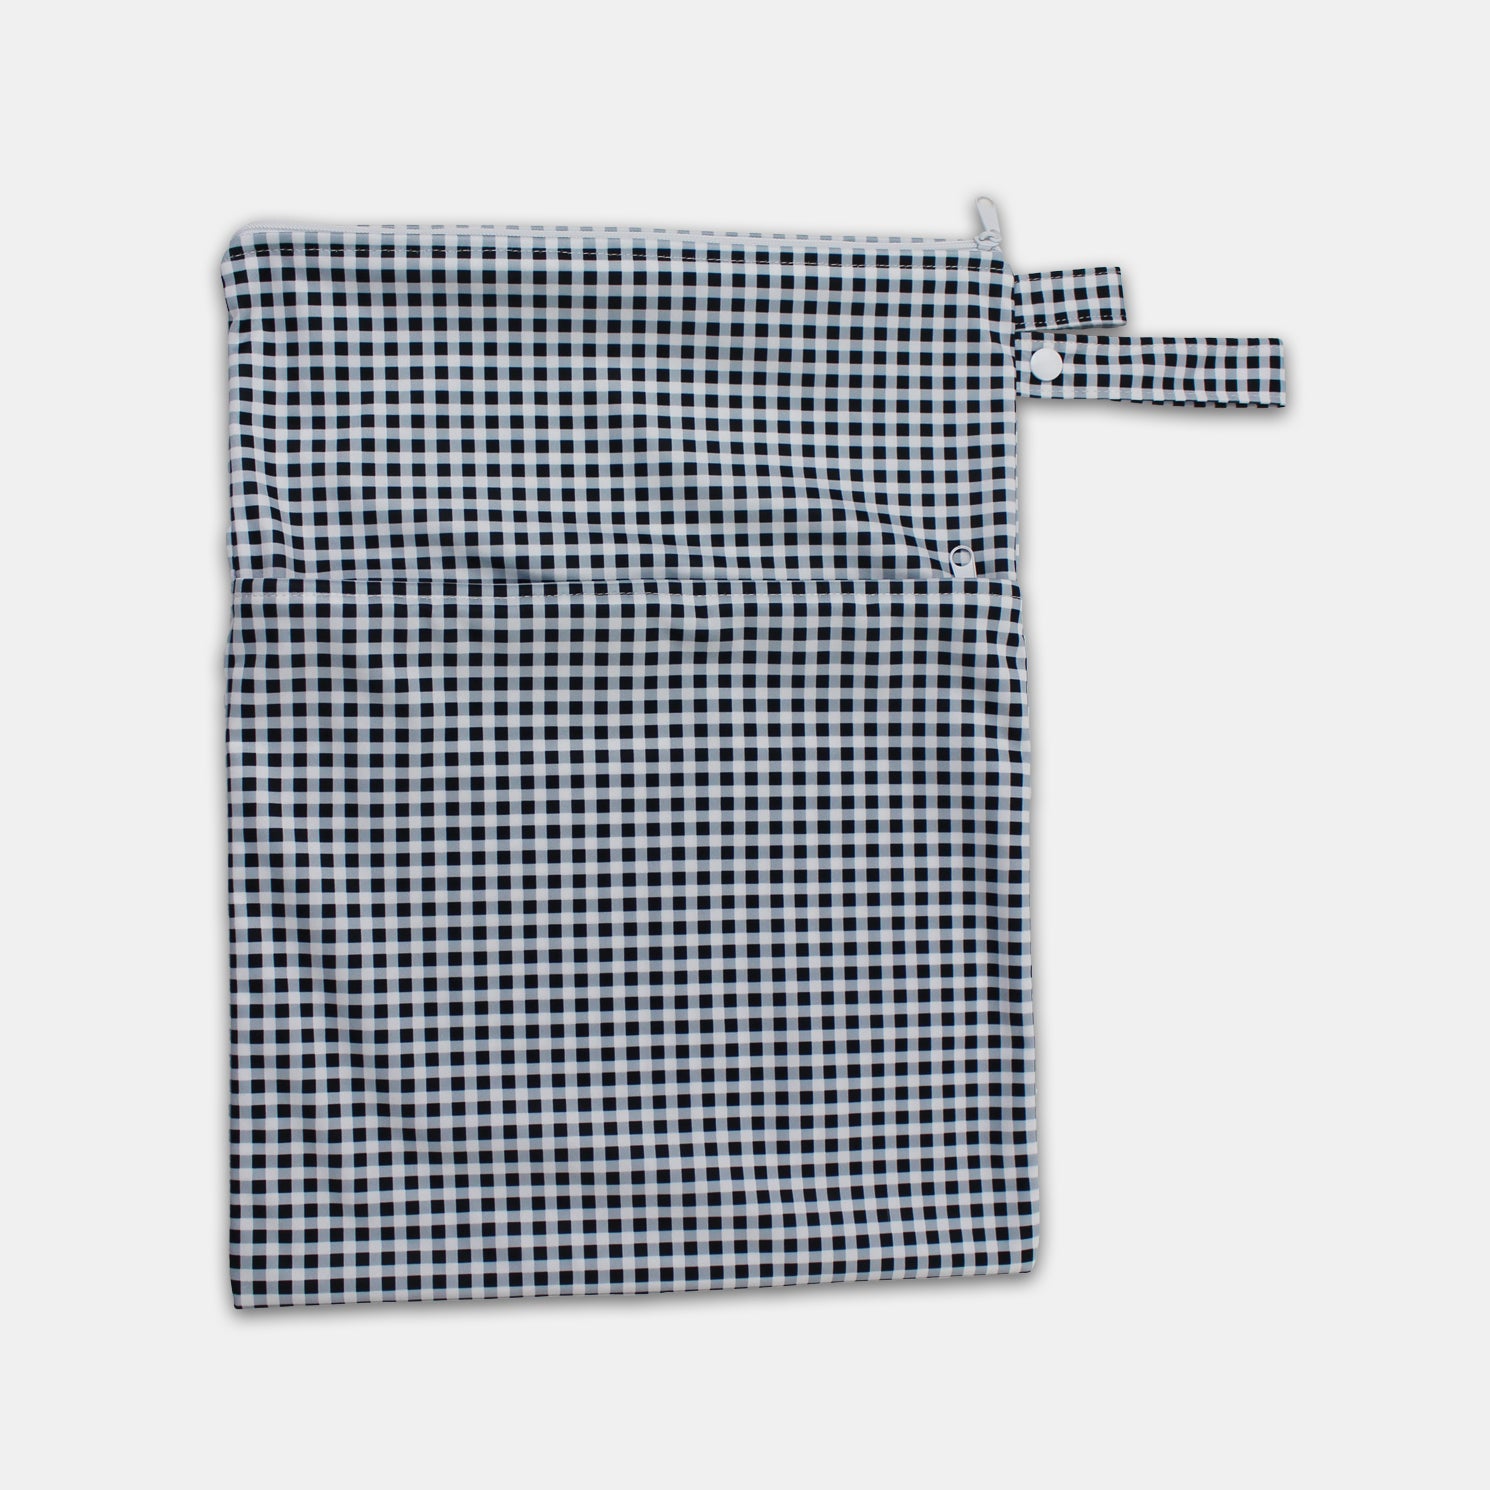 Tyoub Waterproof Stay-dry Zip Wet Bag– Black White Gingham Check Measures 30 x 40 cm. Large front zipped pocket to separate items. Main pouch with zipper to keep wet and dry things separate. Each pocket is waterproofed and zipped. Lightweight and easy to pack and carry.Come with a handy strap for easy carrying or hooking to your nappy bag or stroller.